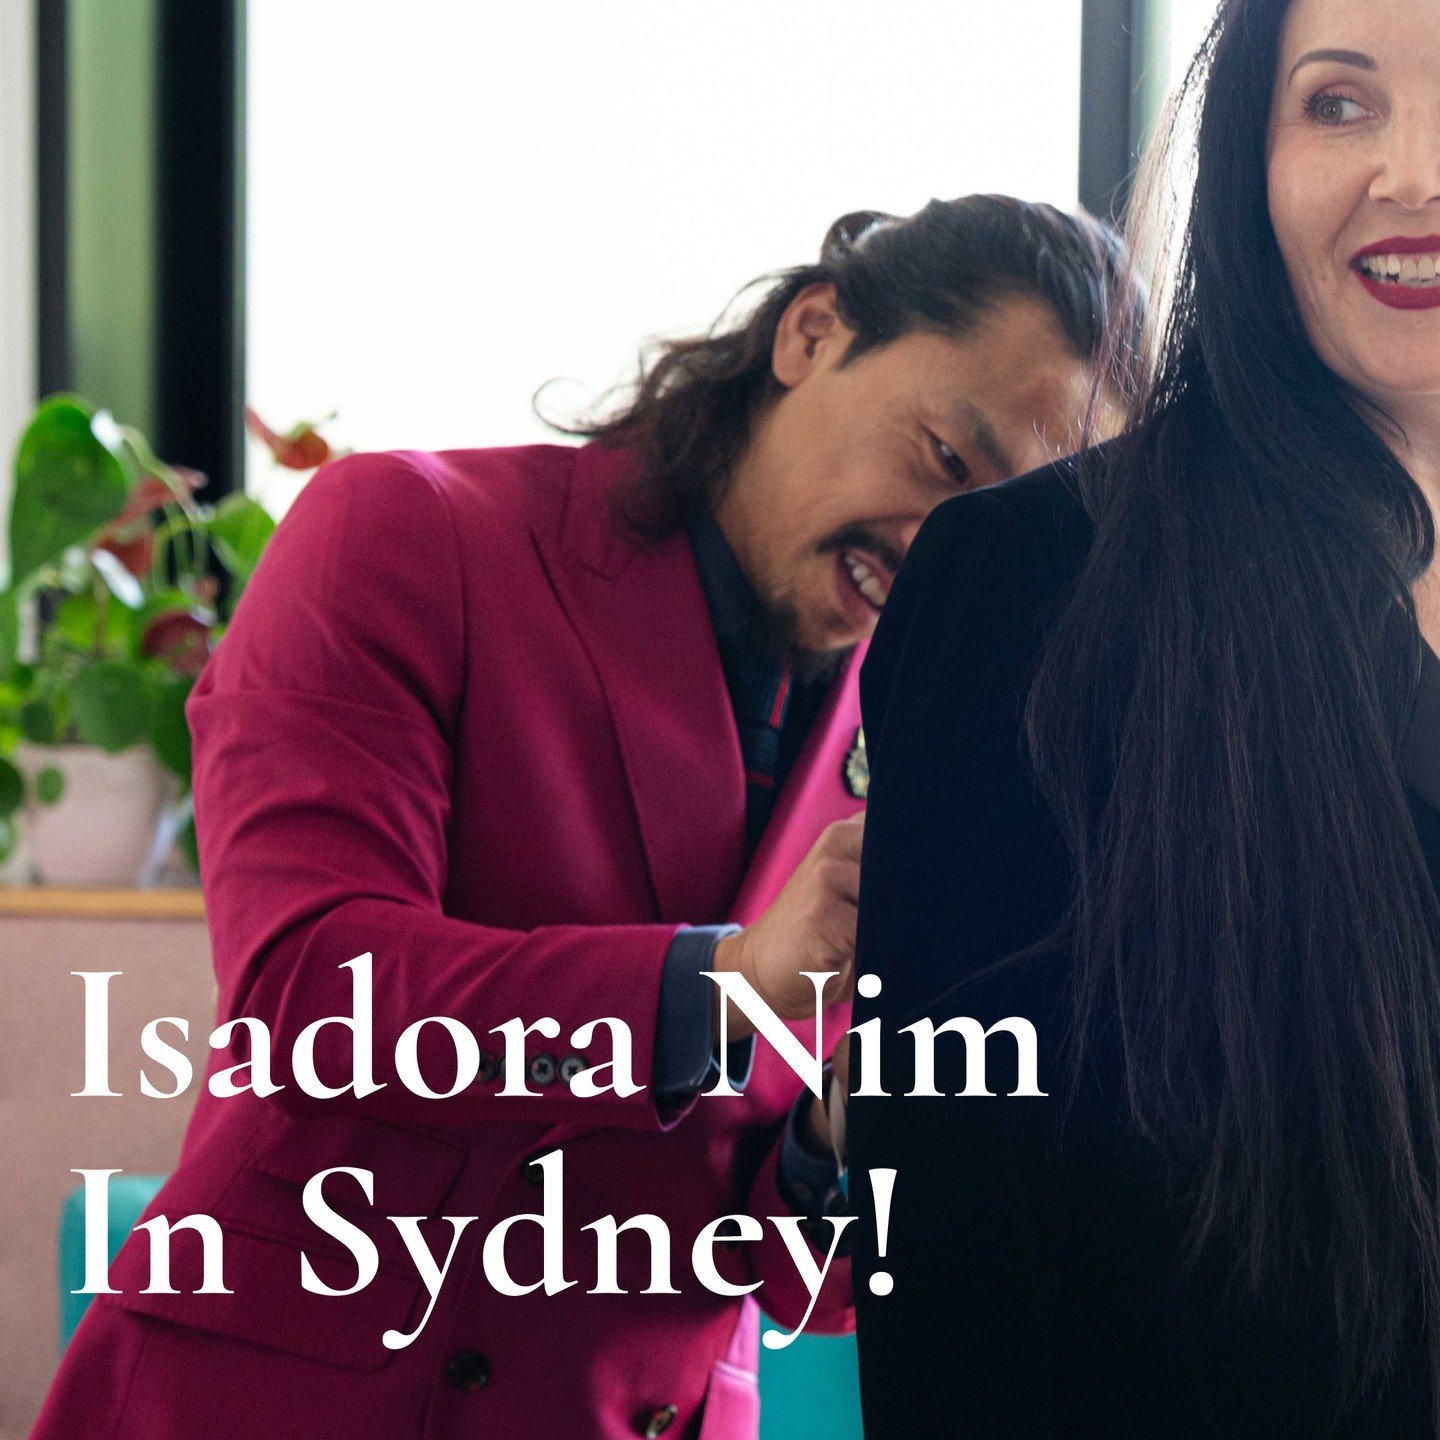 ✨Exciting news, Sydney!✨

Isadora Nim is headed your way in April/May for exclusive appointments and fittings. Elevate your style game with custom couture, personalized styling, exclusive fabrics, and limited slots available. Be red carpet-ready and 